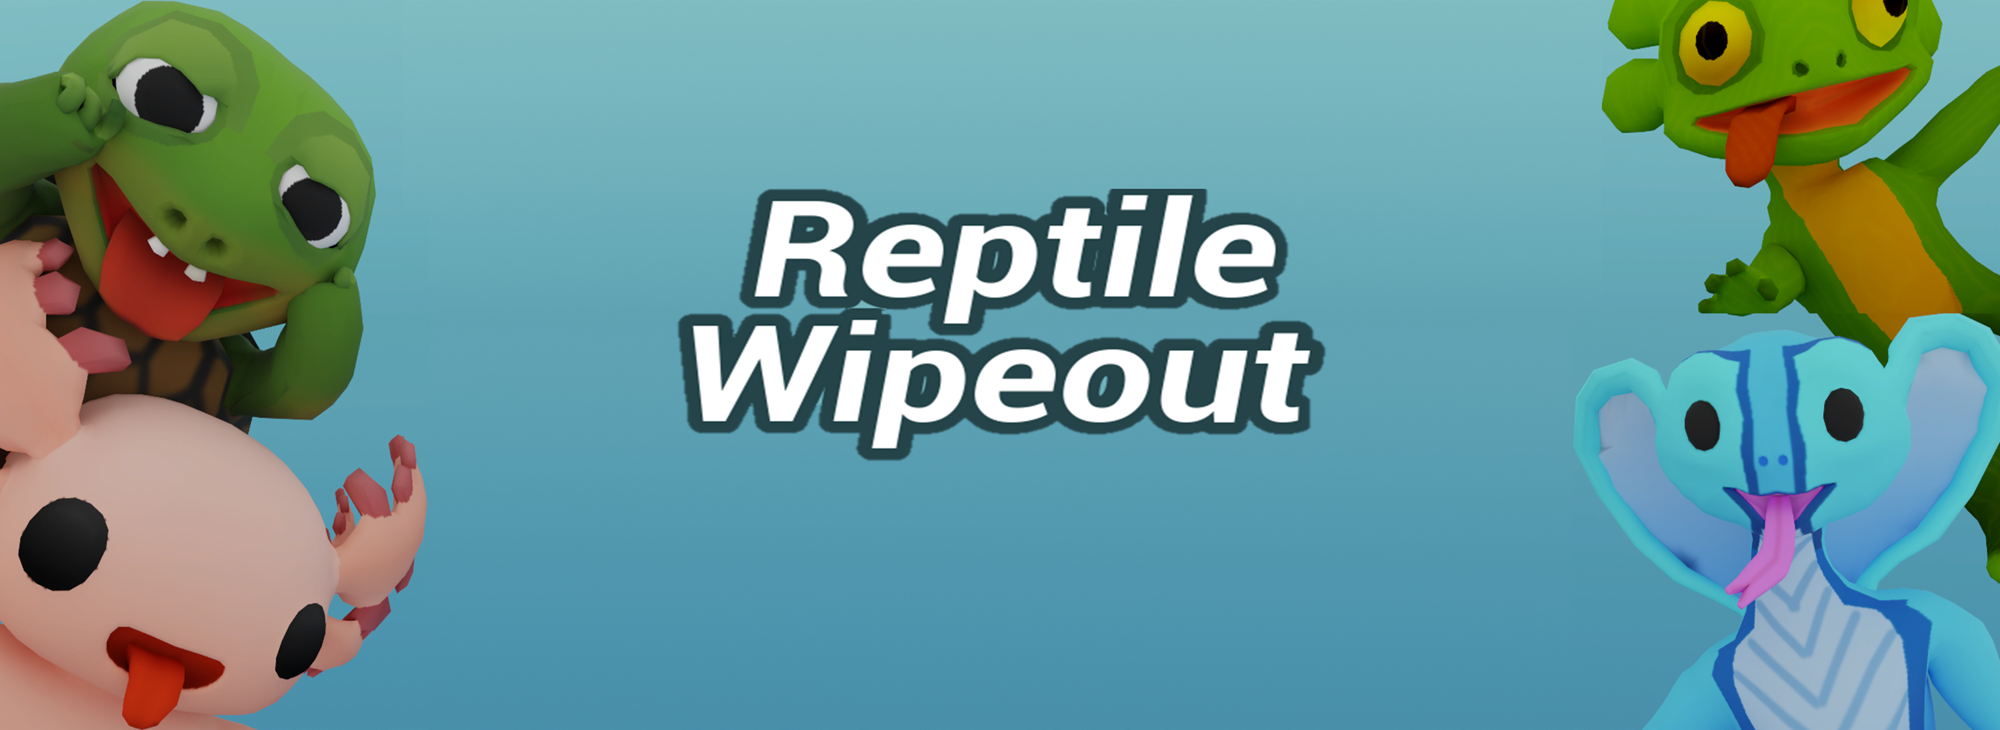 Reptile Wipeout